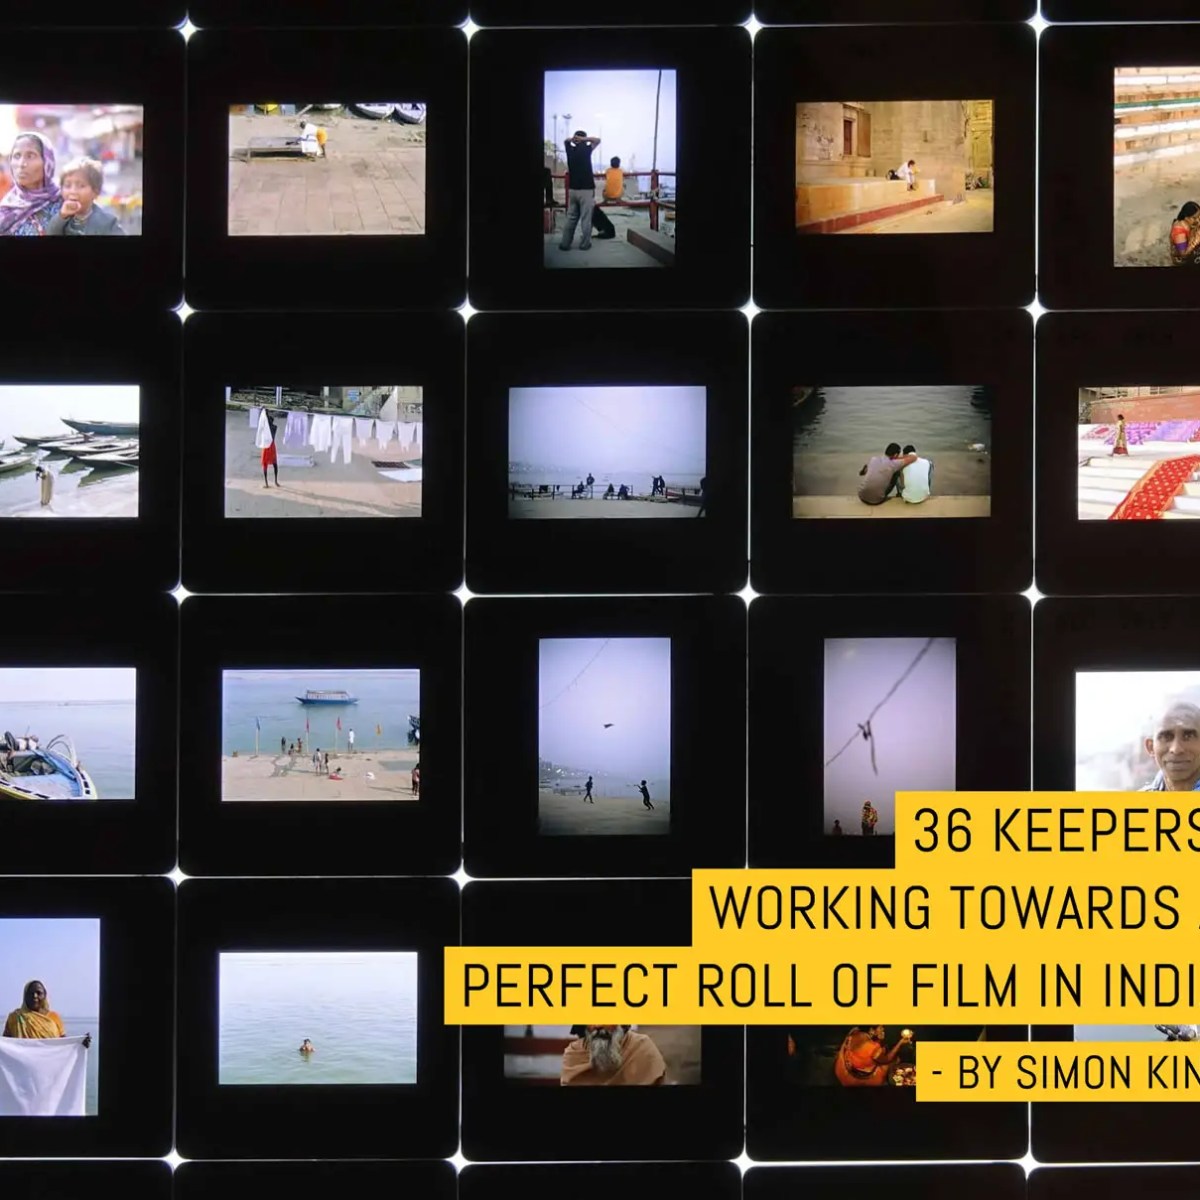 36 keepers: Working towards a perfect roll of film in India